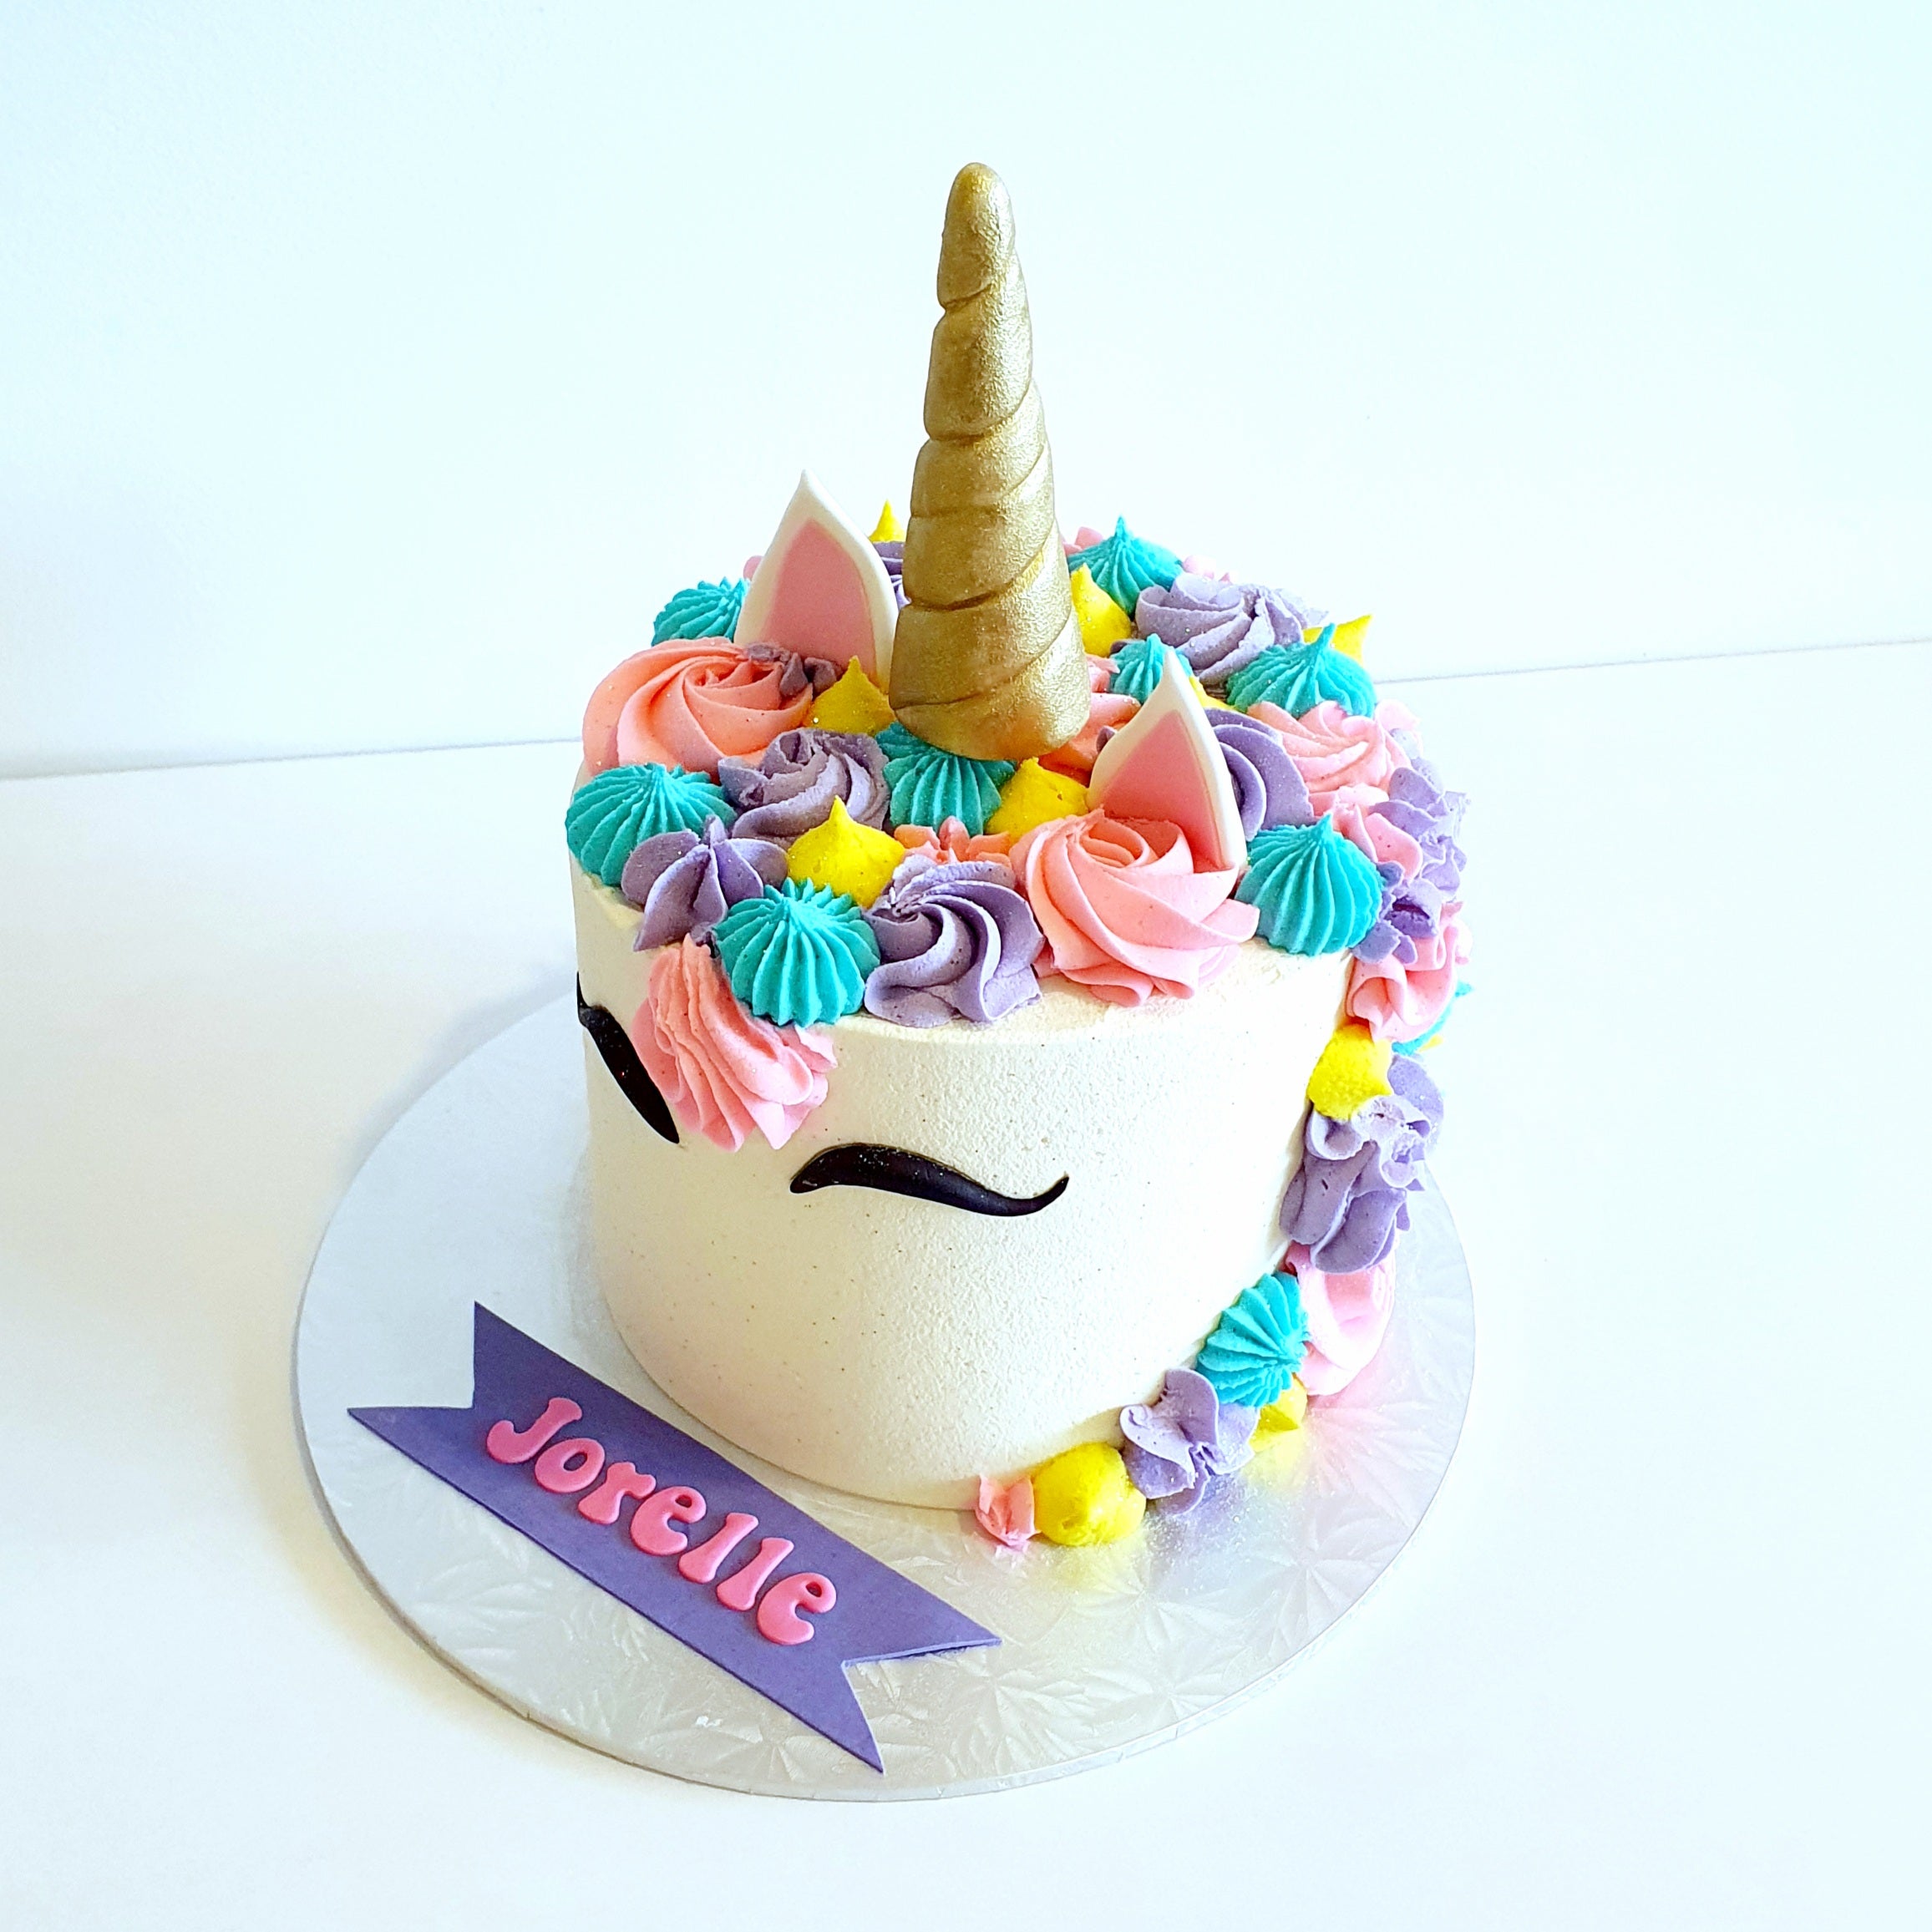 A new design of Unicorn cake available